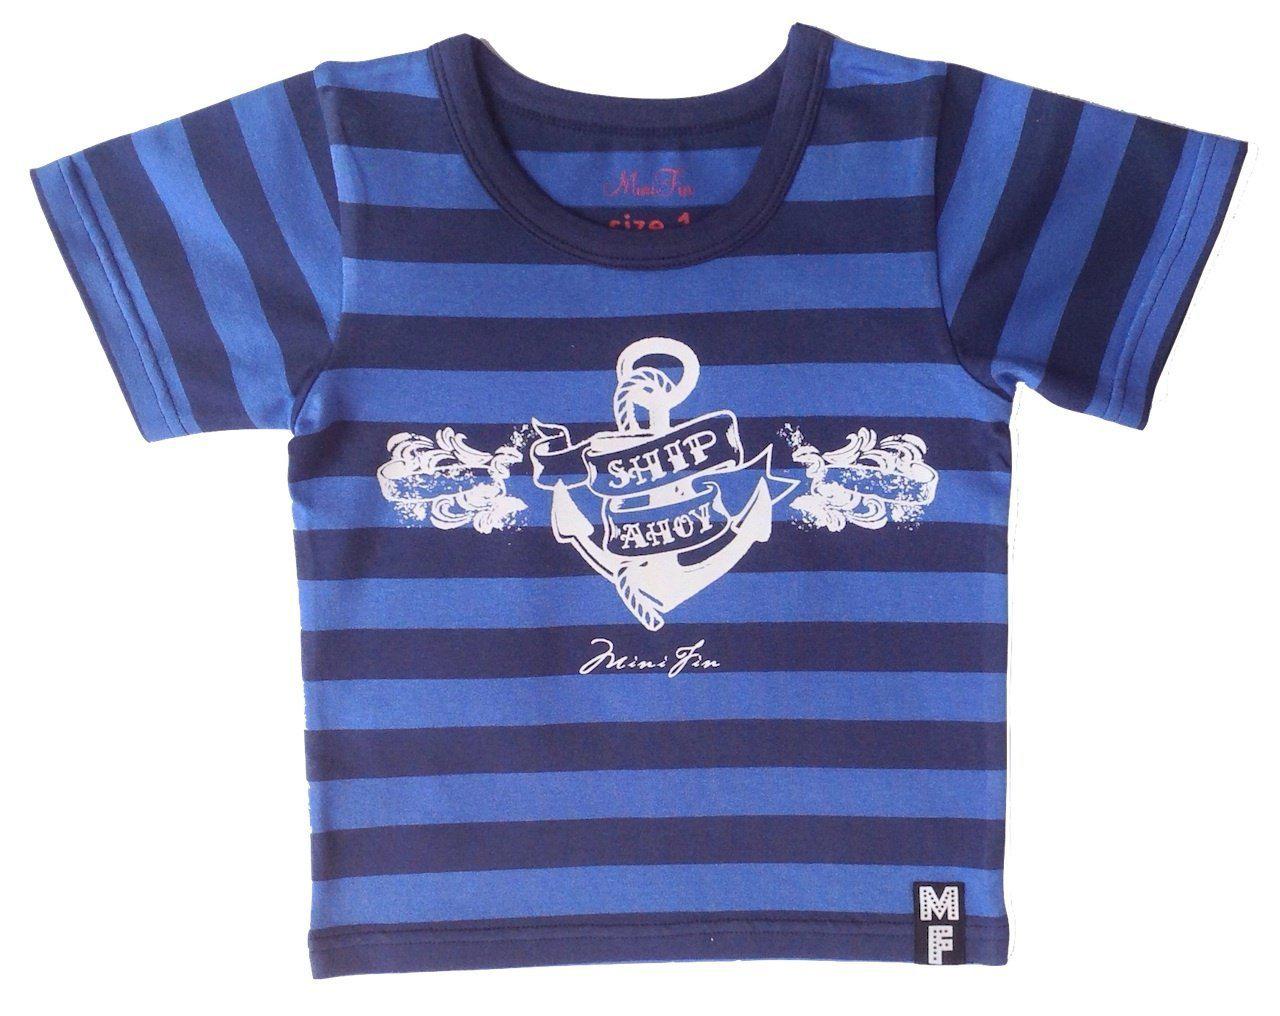 Minifin Boys Striped Tee - Ships Ahoy-Outlet Shop For Kids